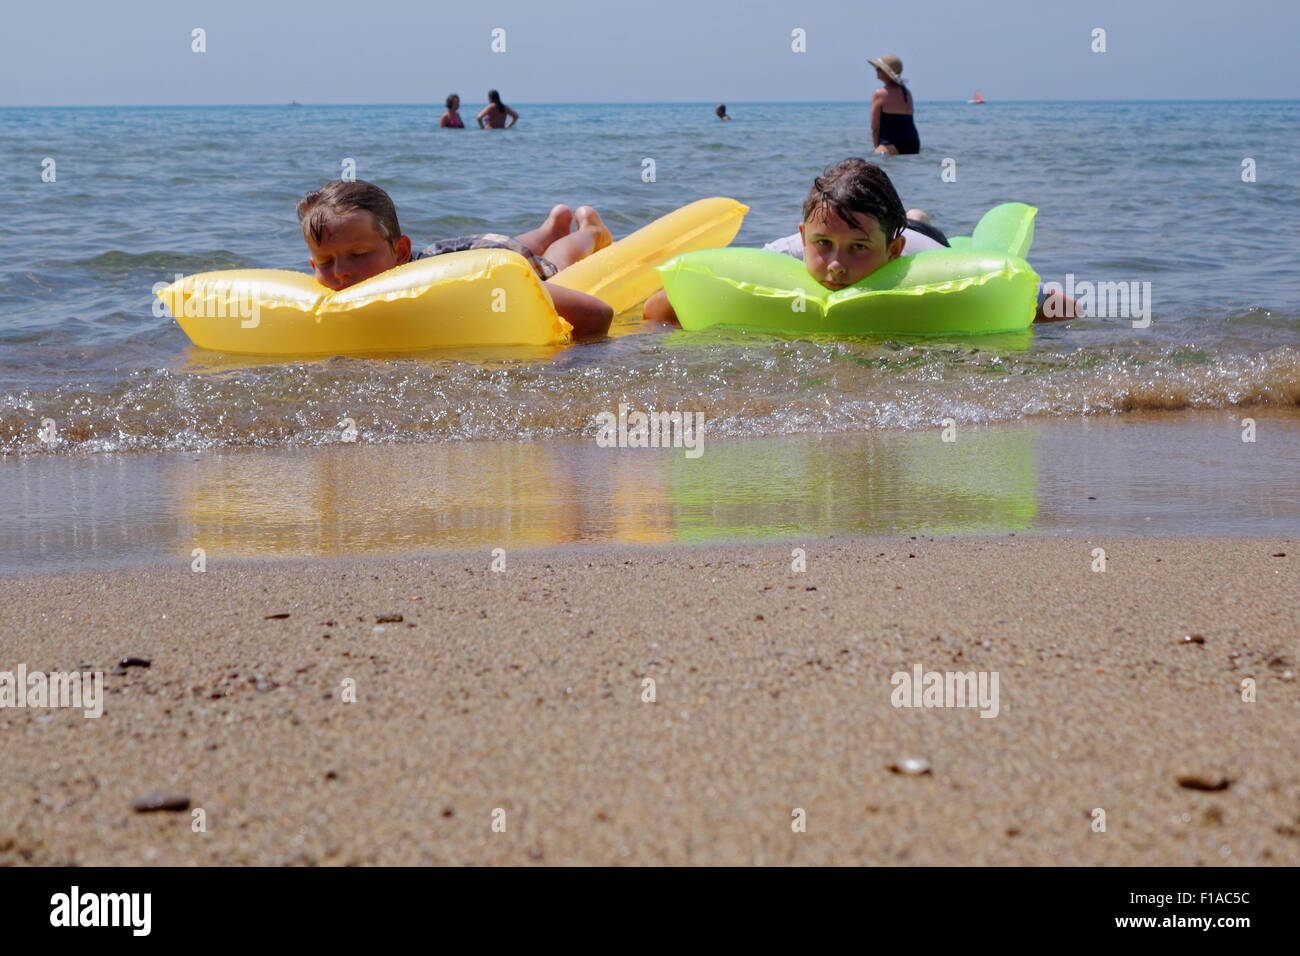 Populonia, Italy, two boys are bored on their air mattresses in the sea Stock Photo